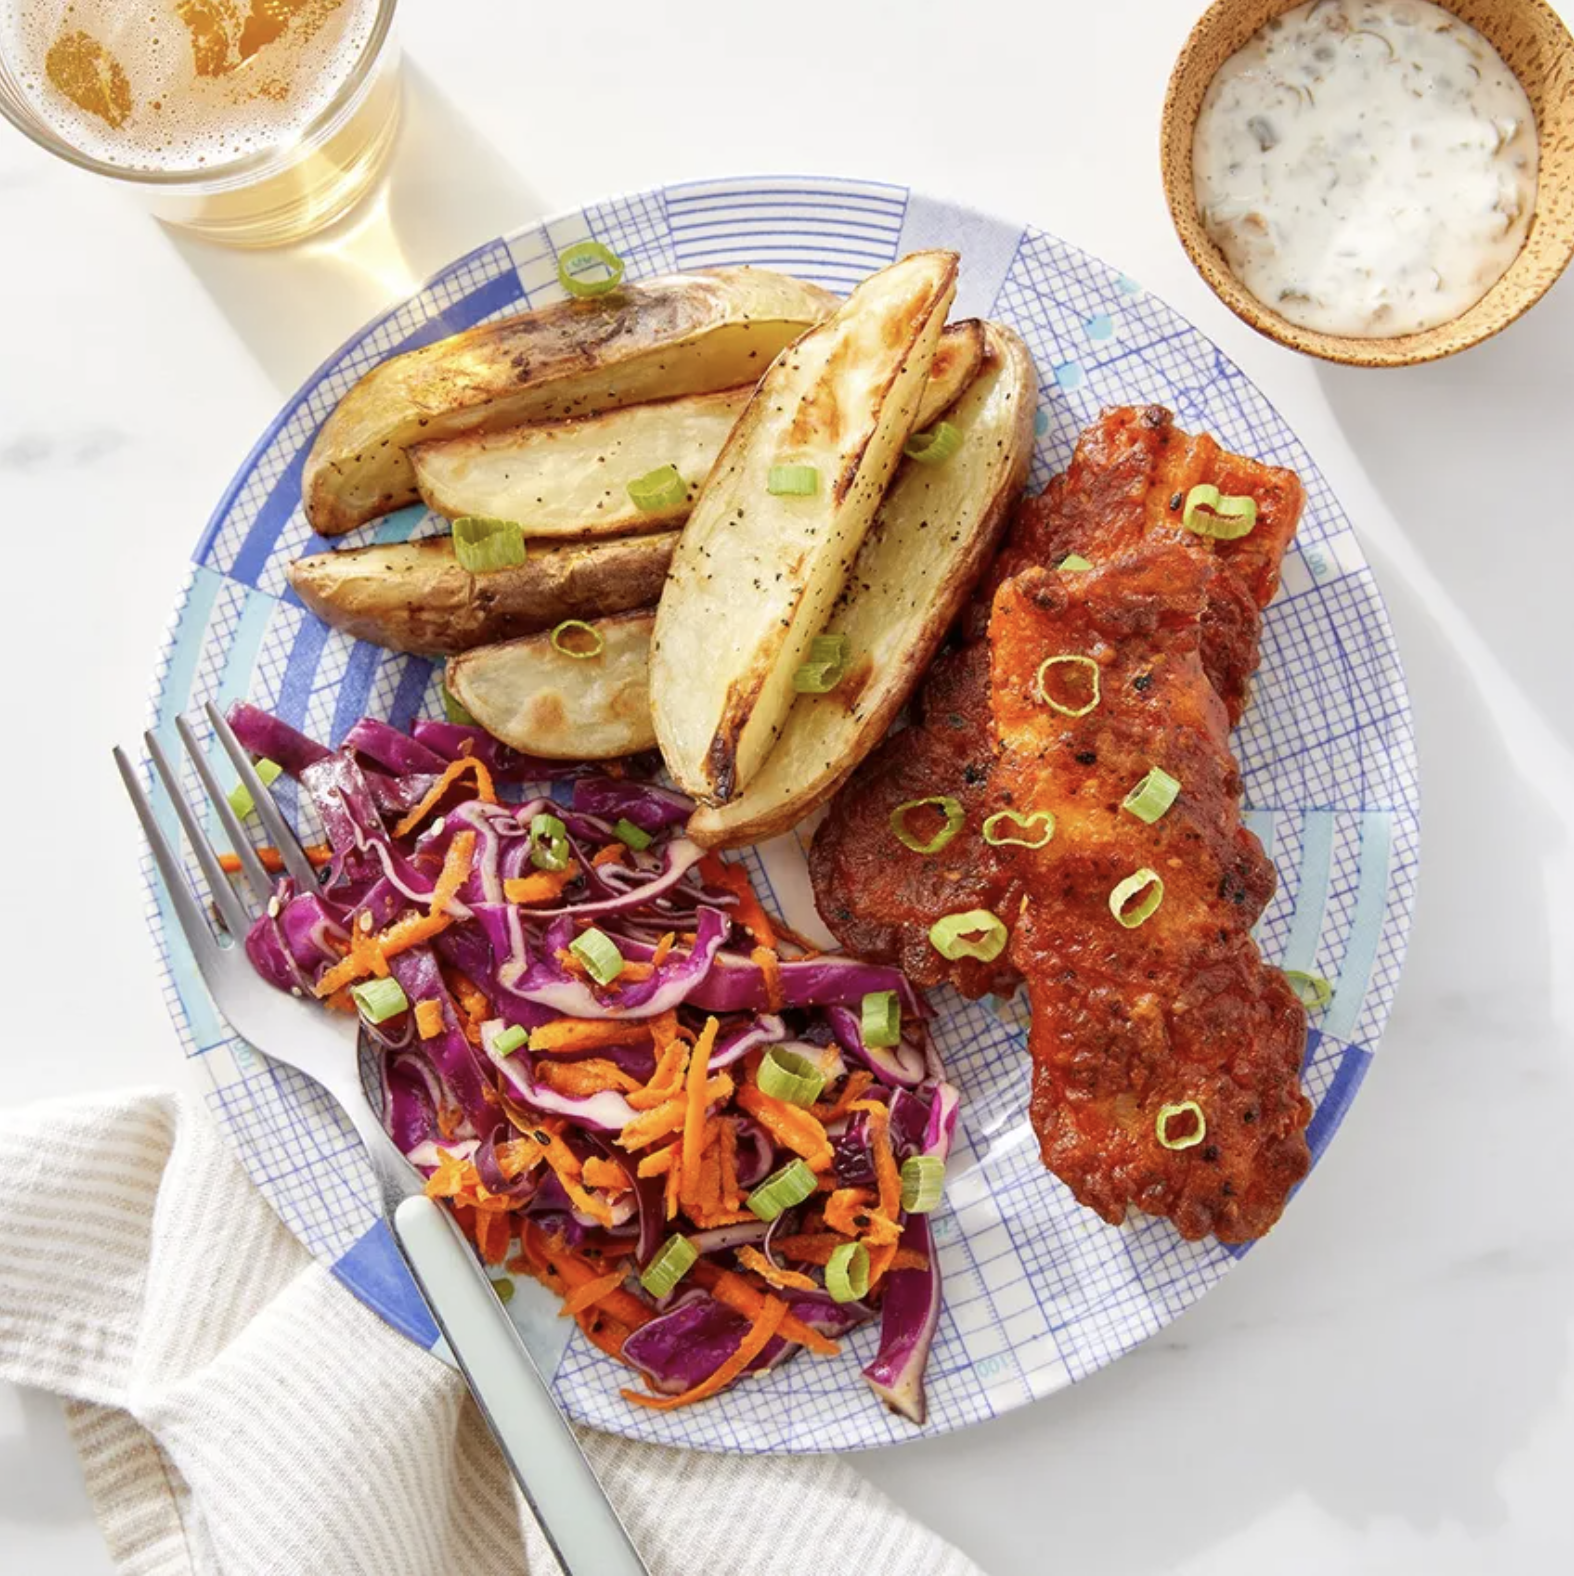 Fish and chips with slaw containing cabbage and carrots